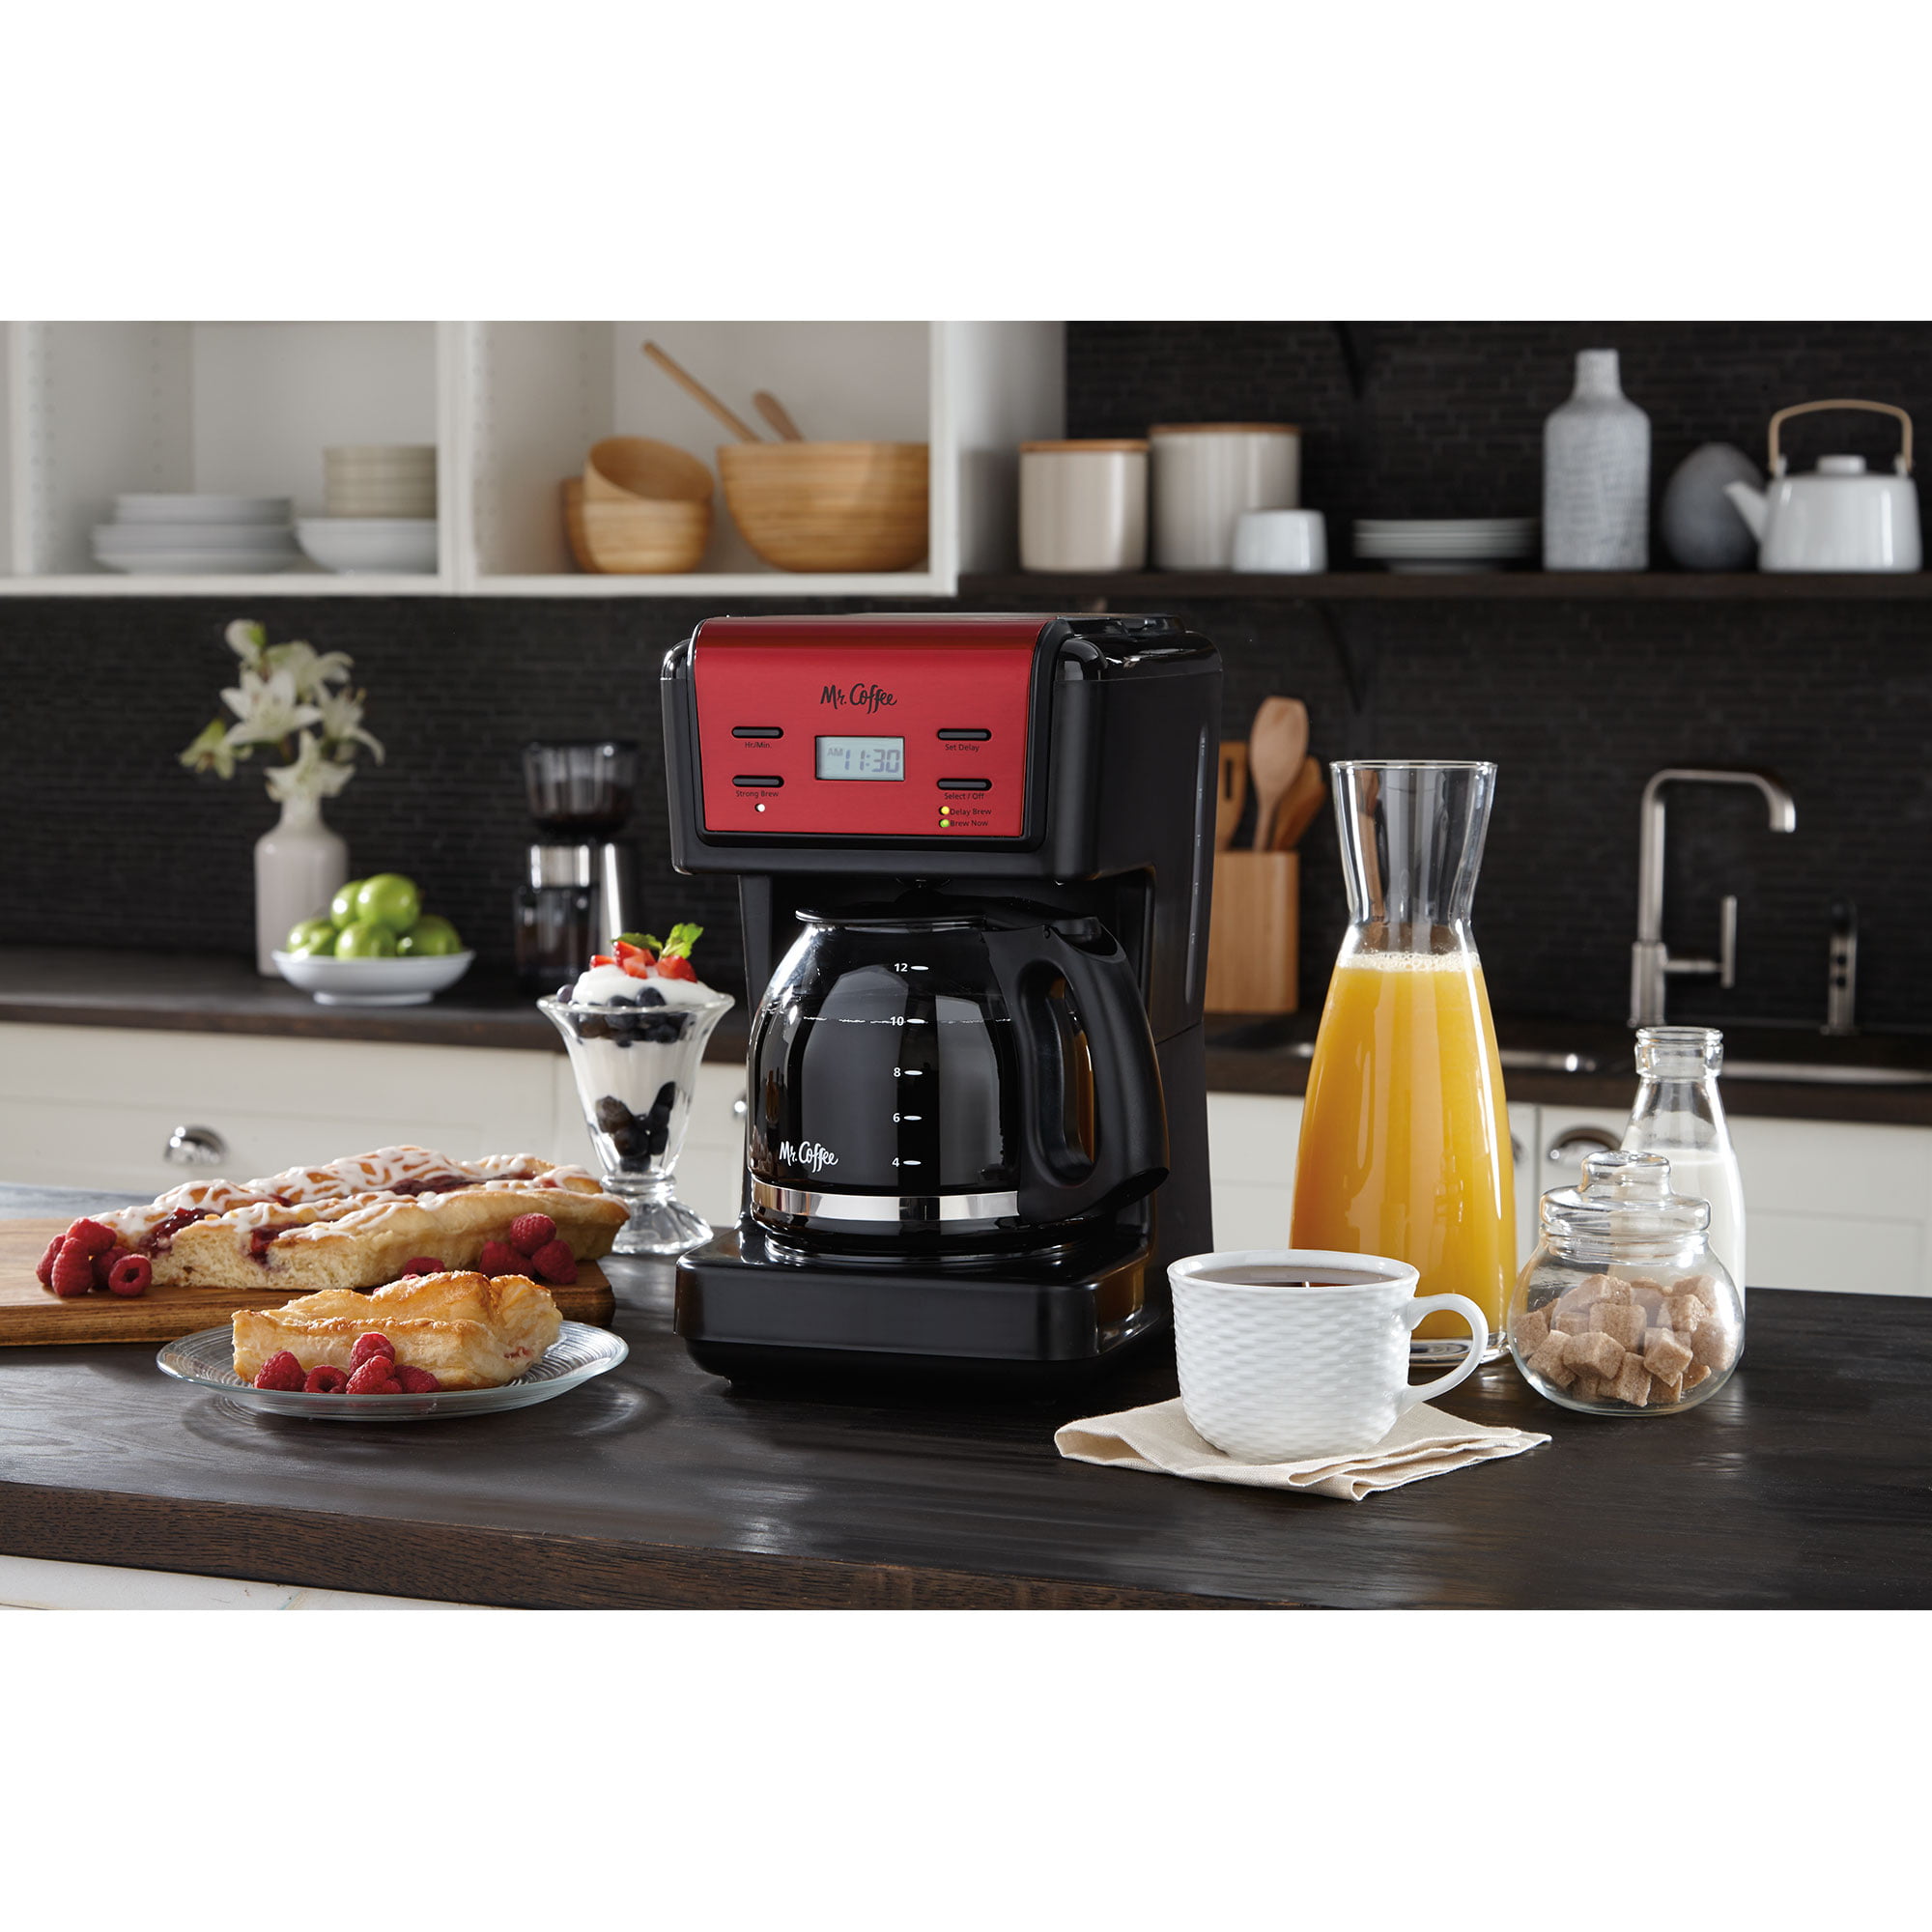  HLN,Drip Coffee Maker Red 12 Cup Automatic Freshness For a  Modern Kitchen,10.80 x 9.25 x 14.60 Inches,46346: Home & Kitchen